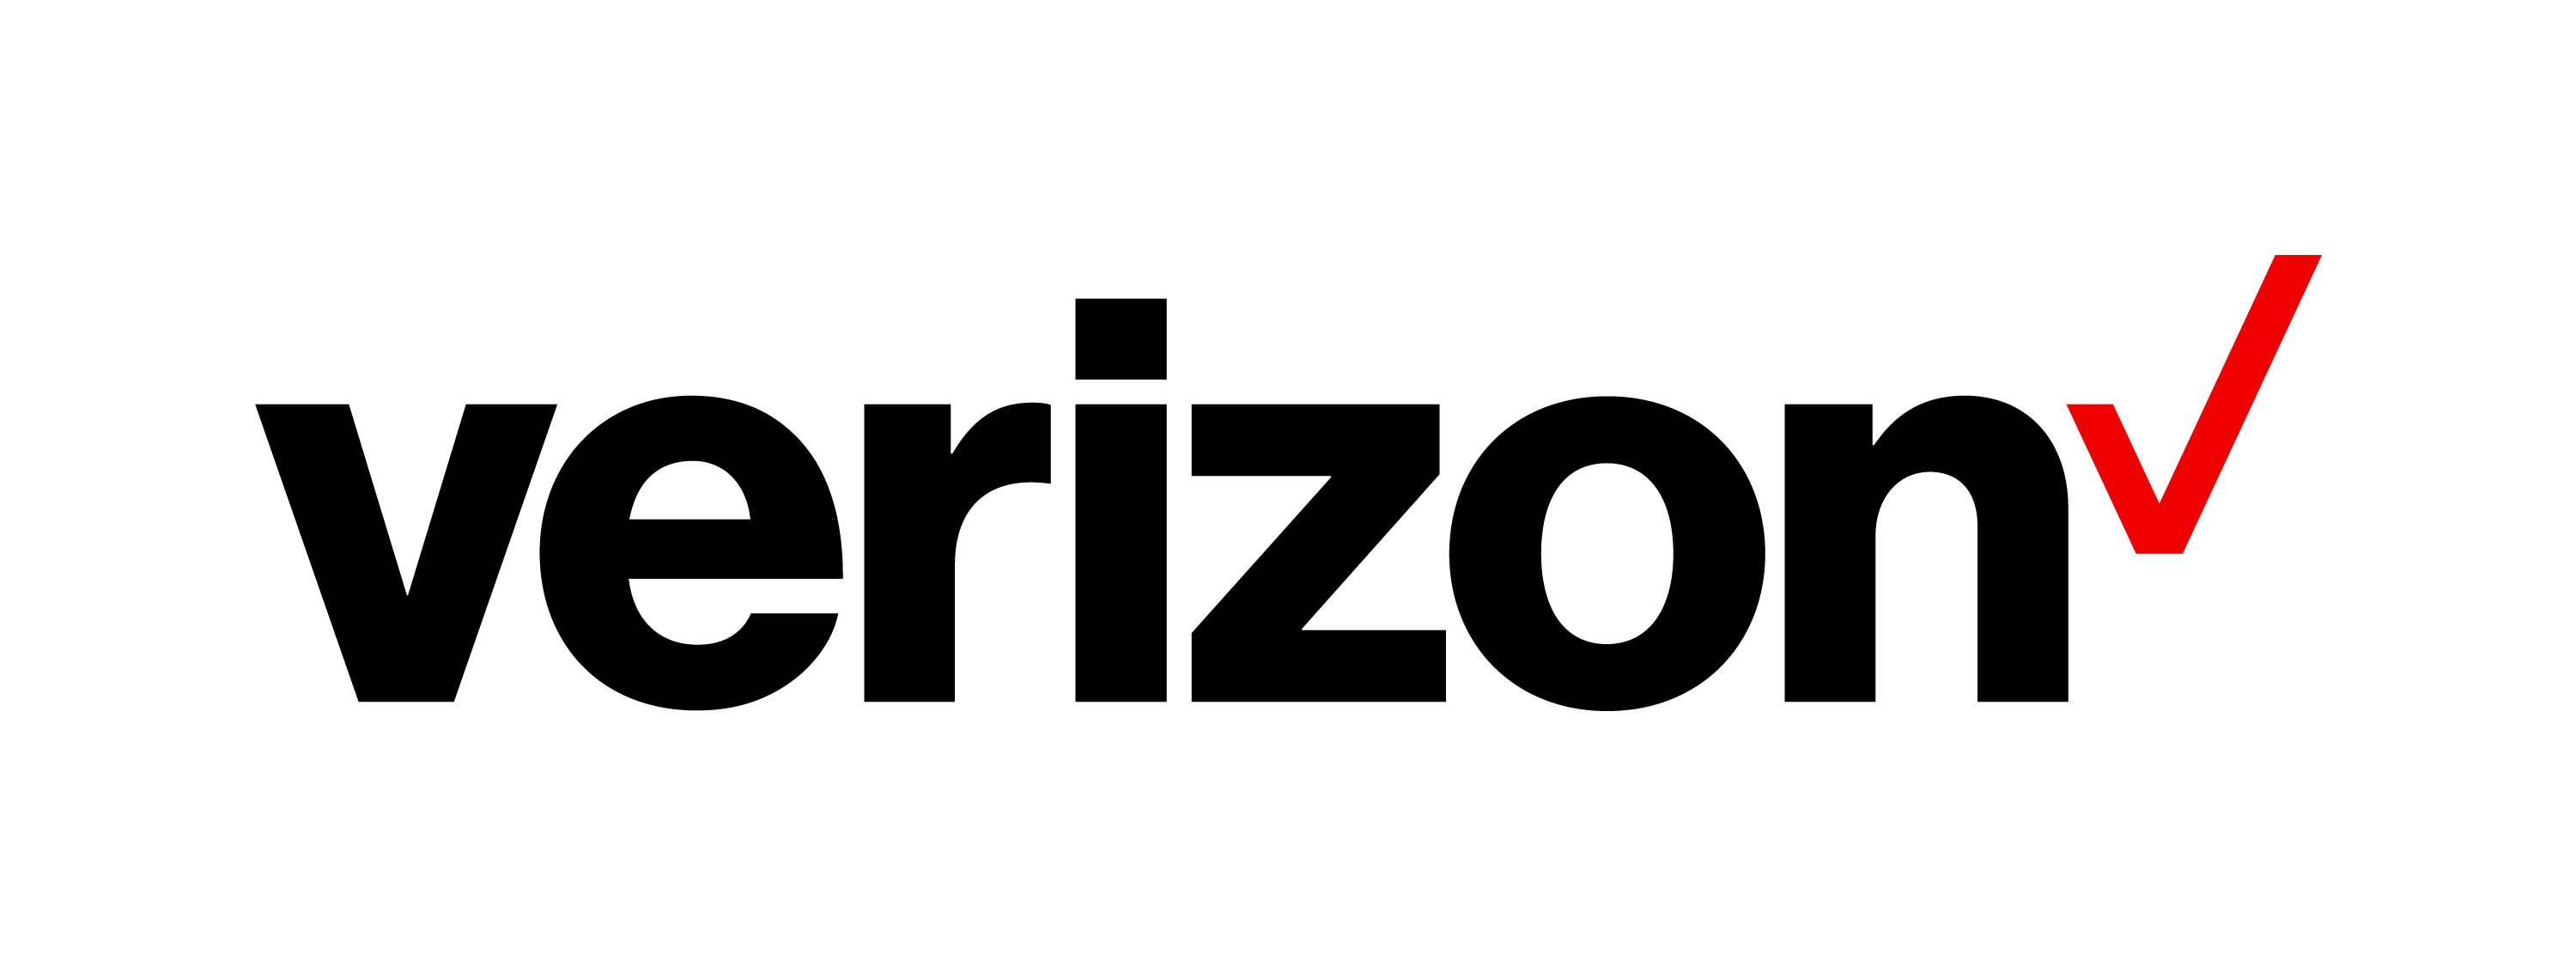 Verizon written in black text with a red check mark after it.